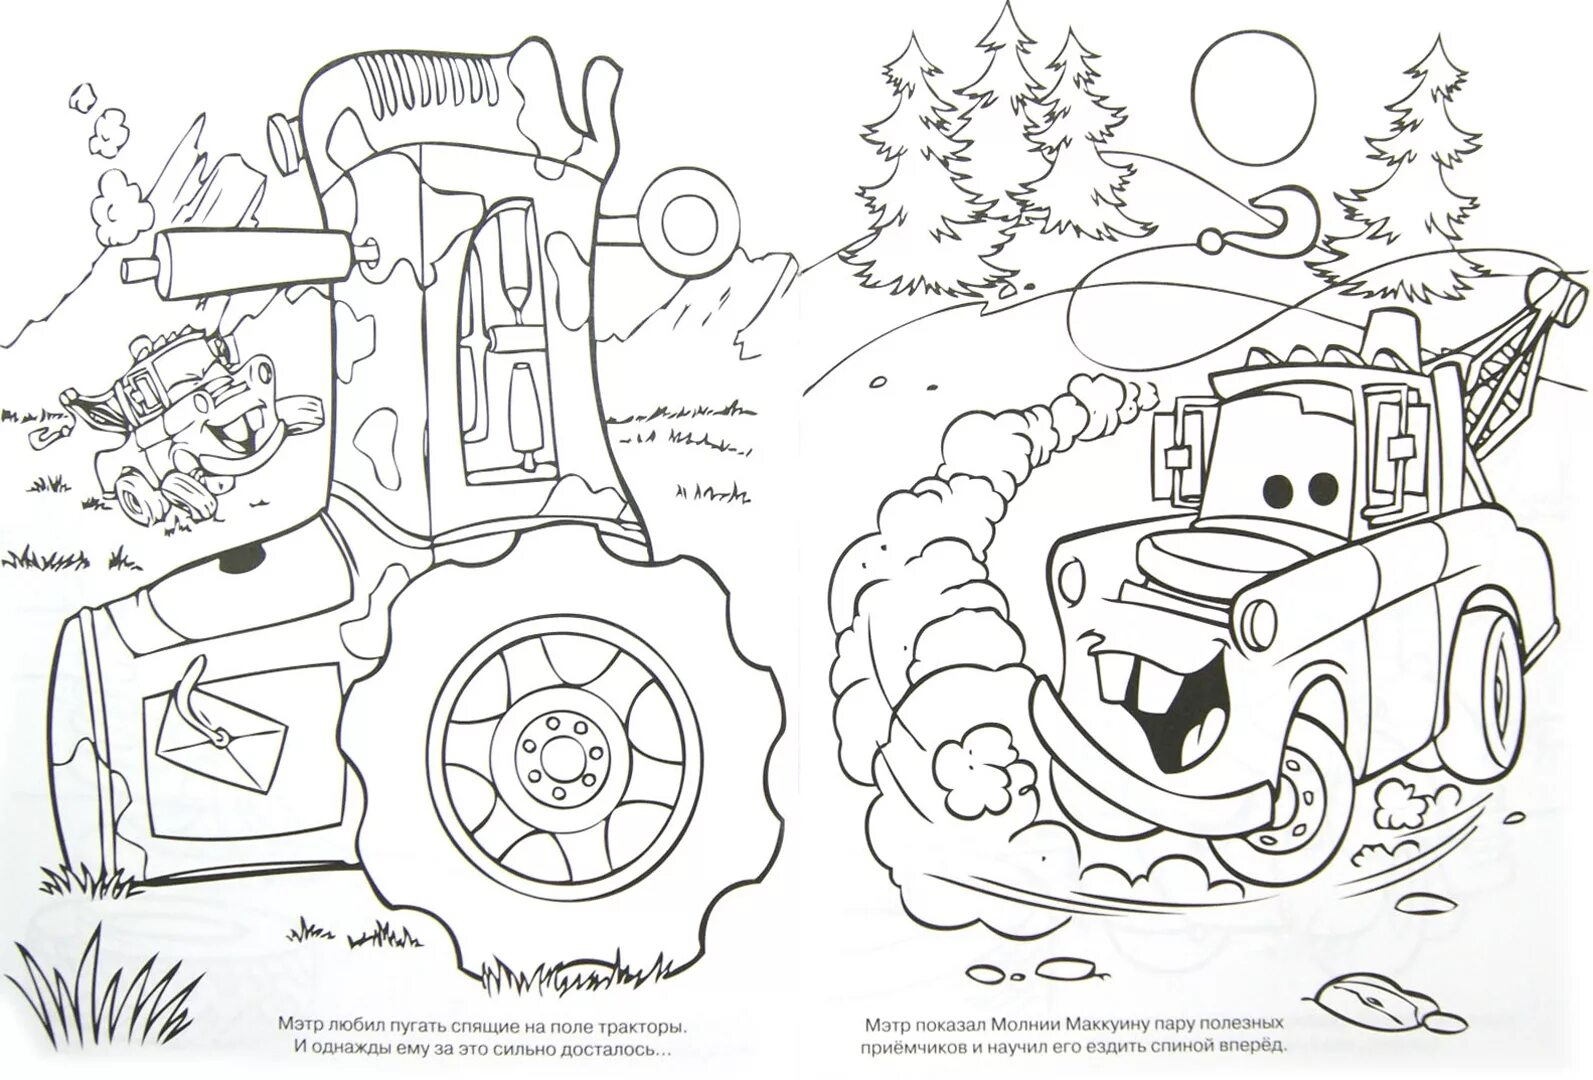 Frank's exquisite cars coloring book